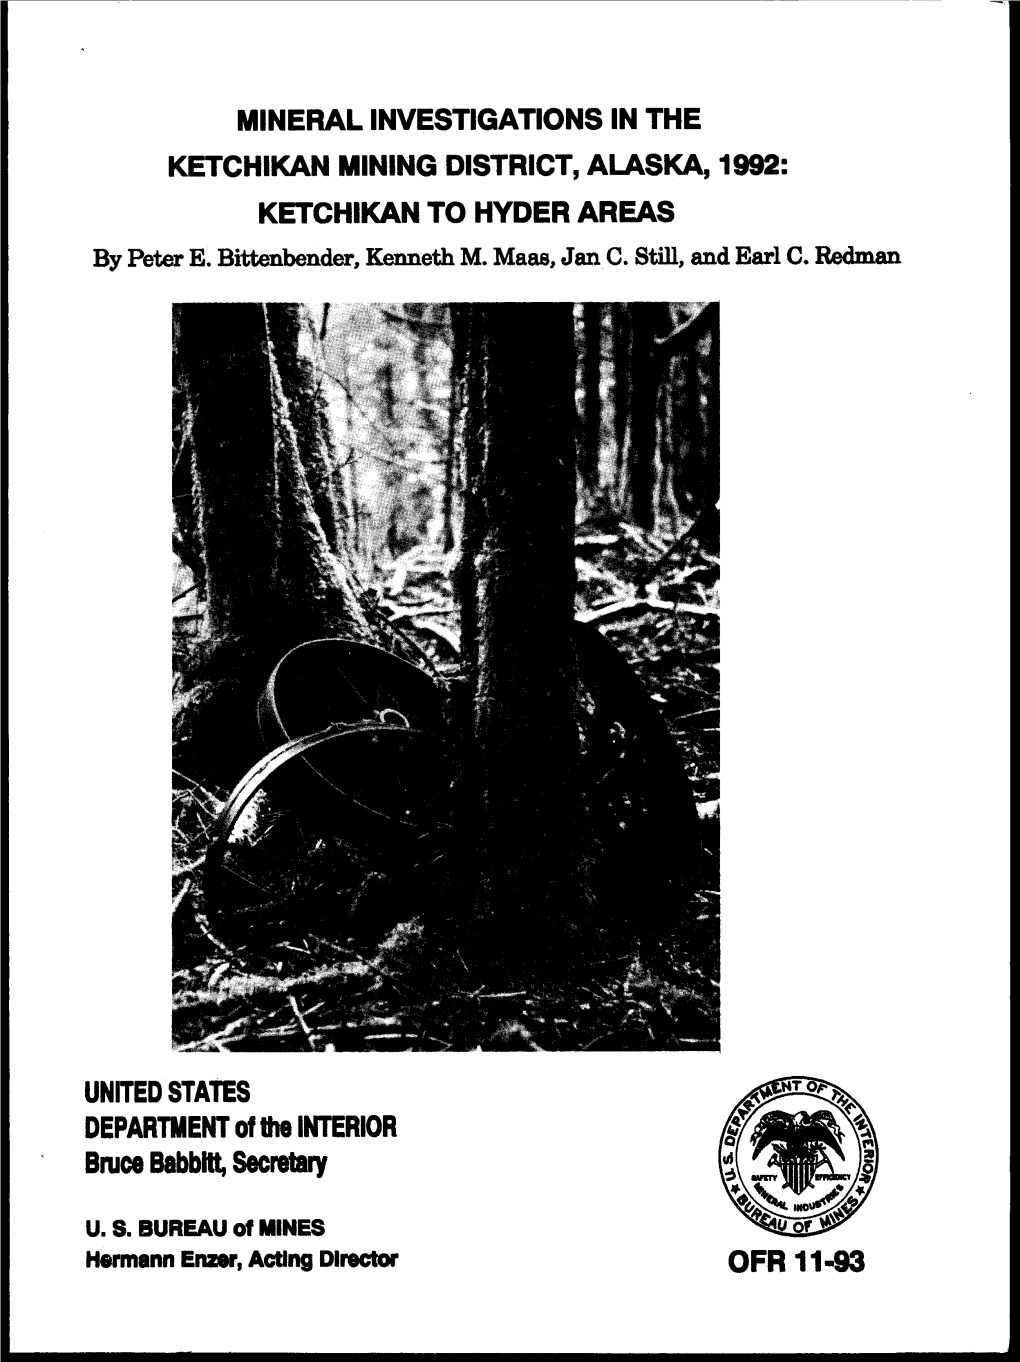 MINERAL INVESTIGATIONS in the KETCHIKAN MINING DISTRICT, ALASKA, 1992: KETCHIKAN to HYDER AREAS by Peter E